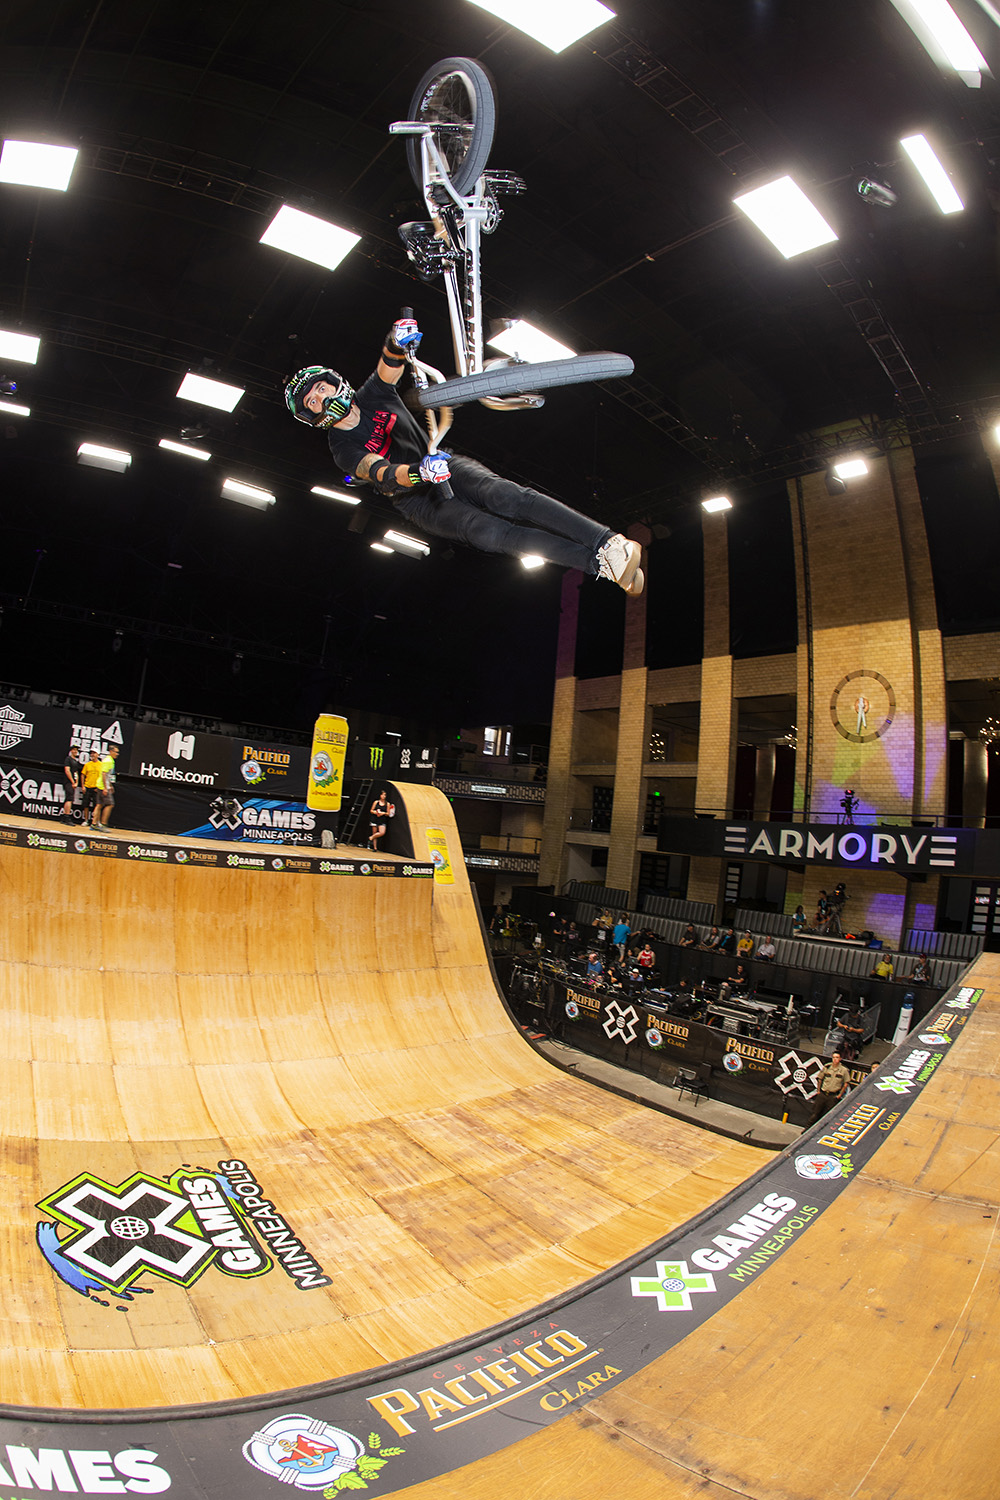 Monster Energy’s Jamie Bestwick Claims Silver in BMX Vert at X Games Minneapolis 2019